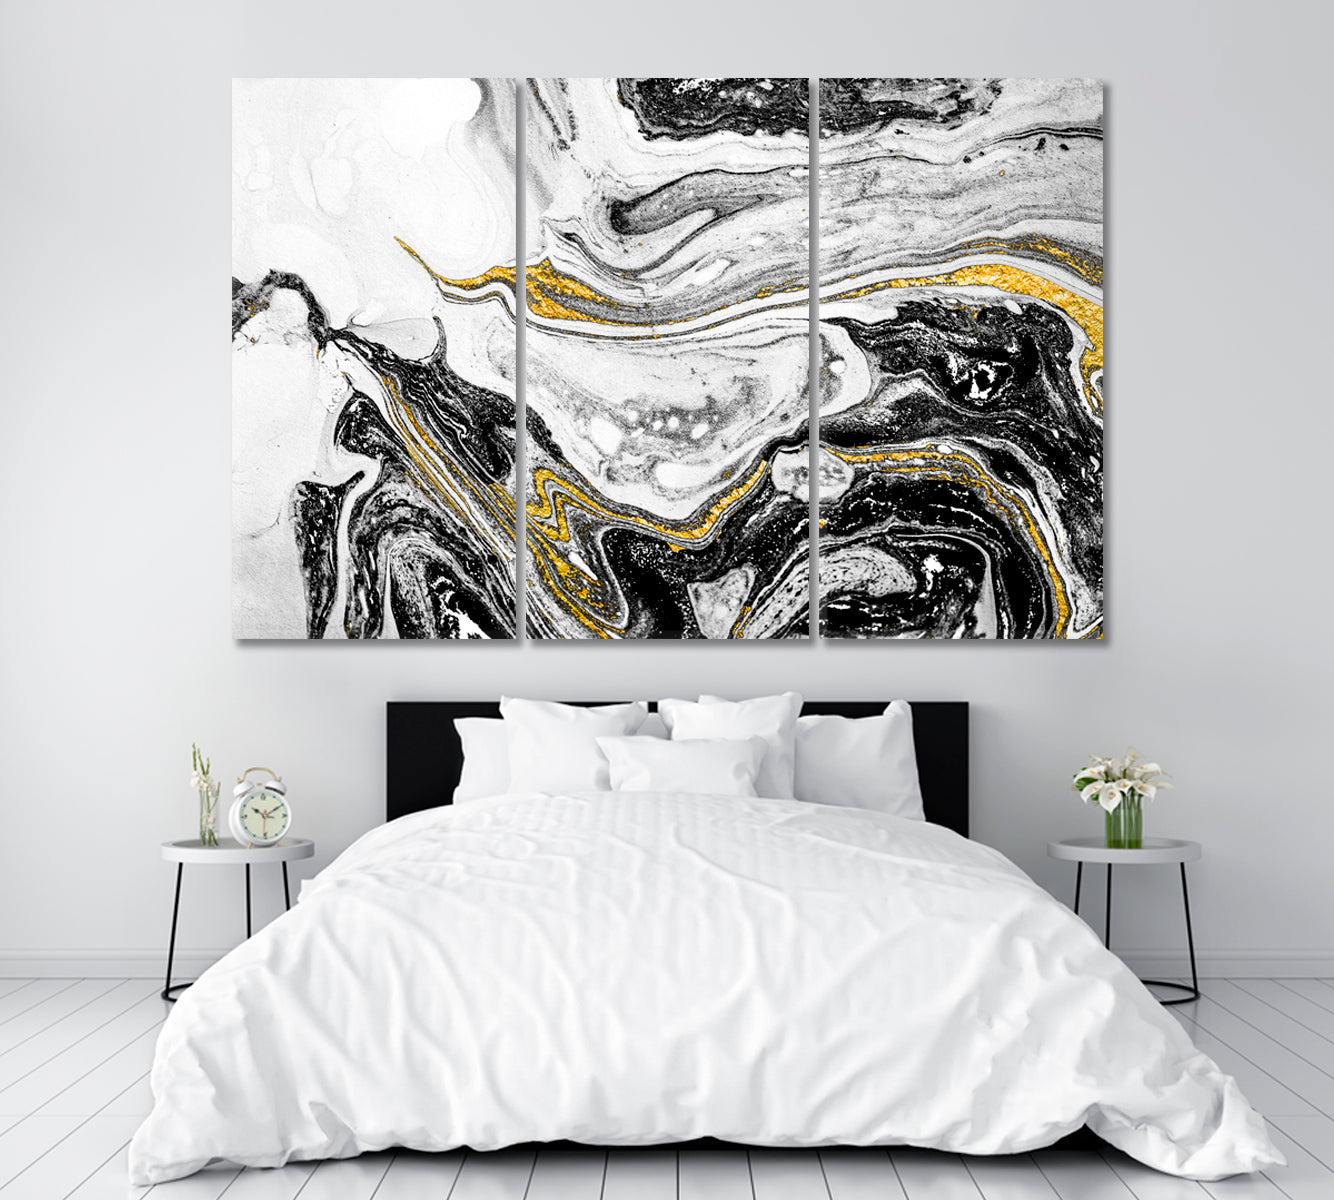 Luxury Black and White Paper Marbling Canvas Print ArtLexy 3 Panels 36"x24" inches 